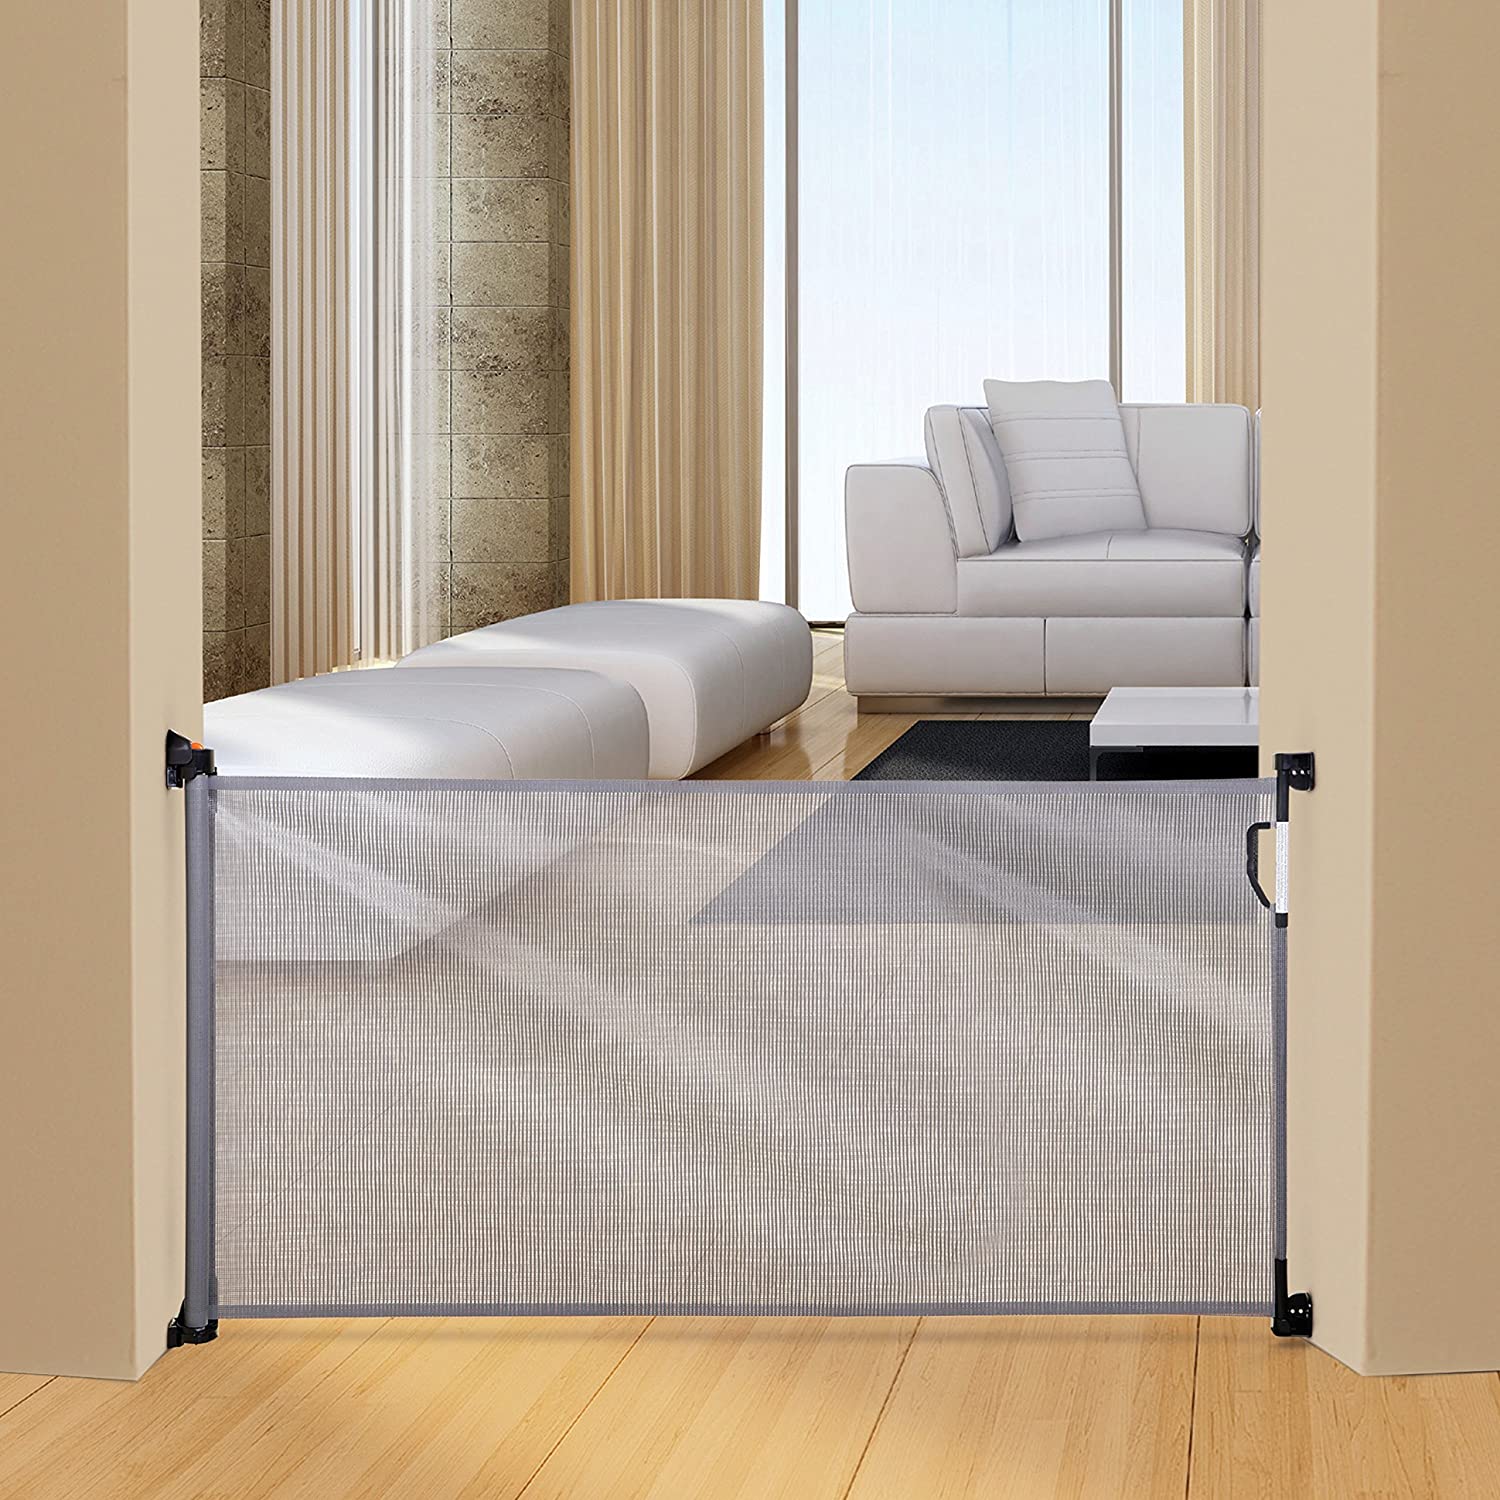 Dreambaby Retractable Gate, Grey ( COLOR MAY VARY) - e4cents